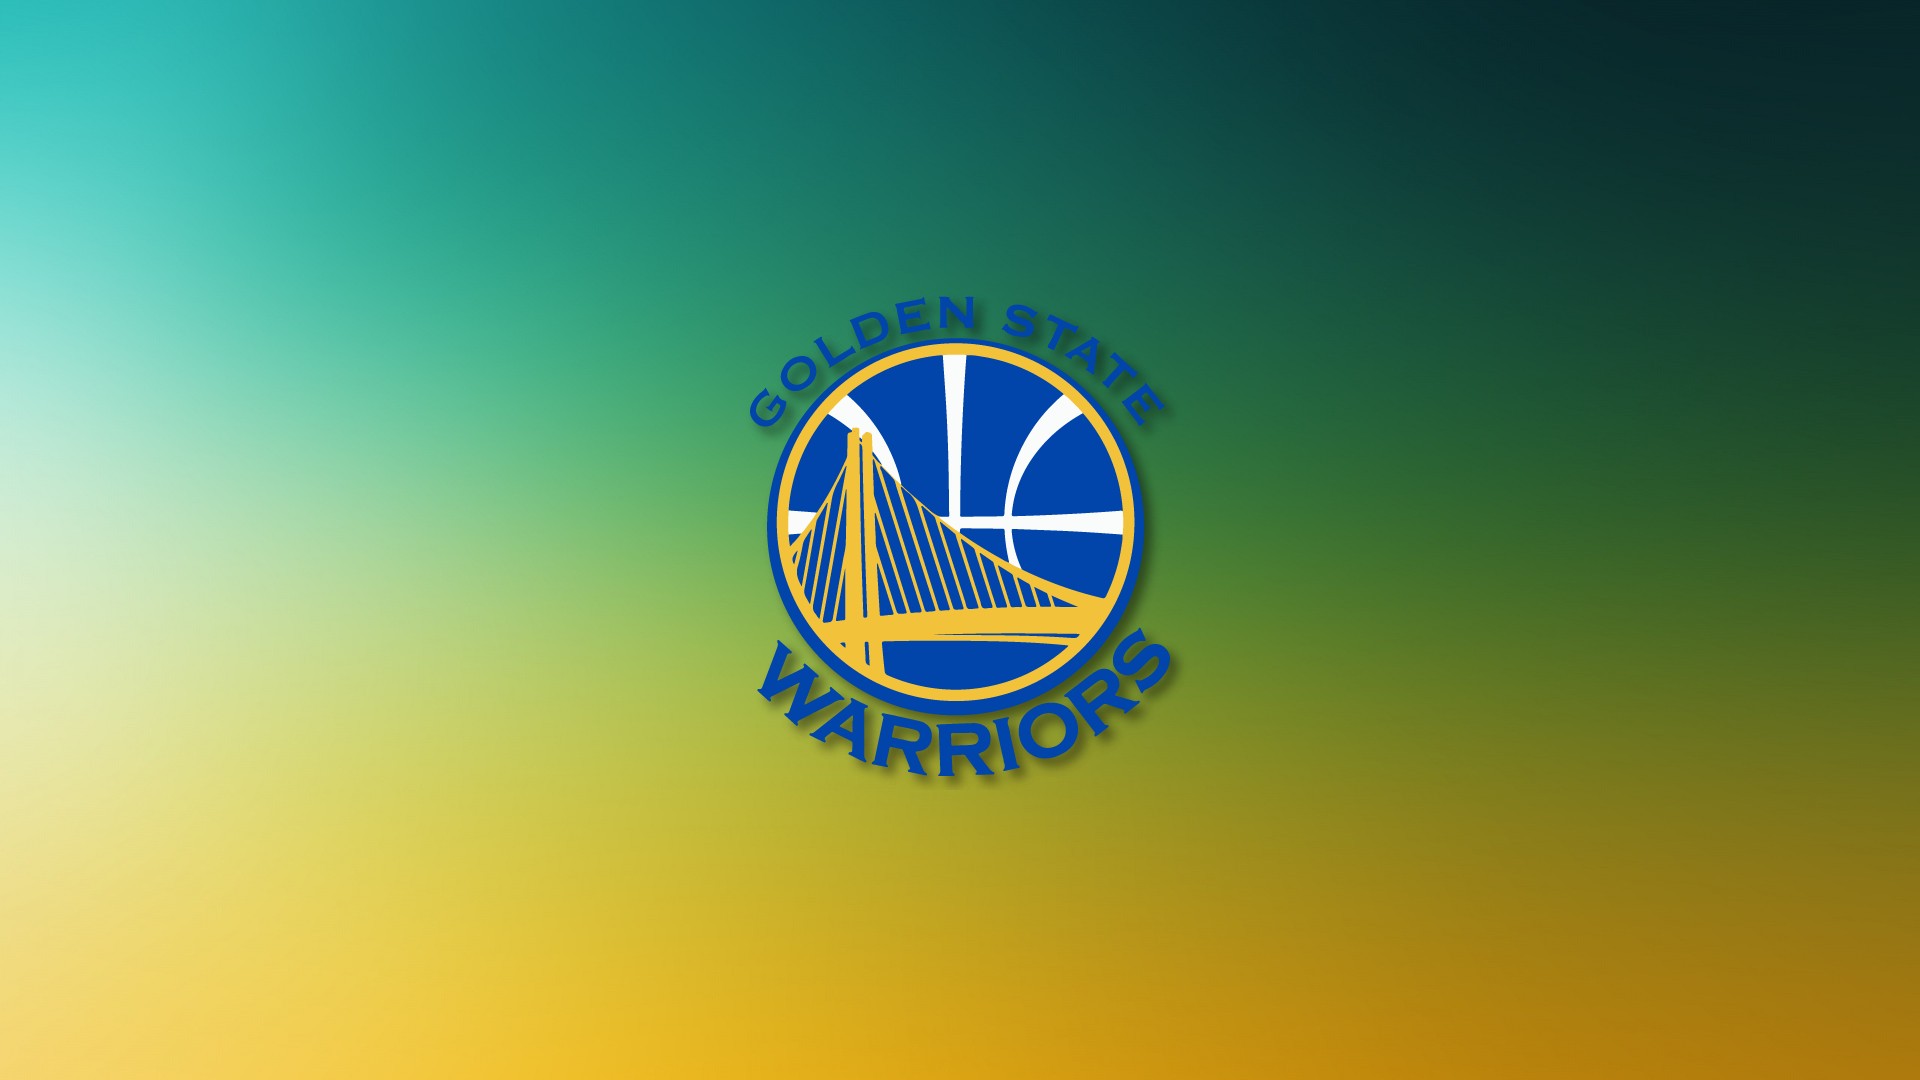 HD Backgrounds Golden State Warriors NBA with image dimensions 1920x1080 pixel. You can make this wallpaper for your Desktop Computer Backgrounds, Windows or Mac Screensavers, iPhone Lock screen, Tablet or Android and another Mobile Phone device